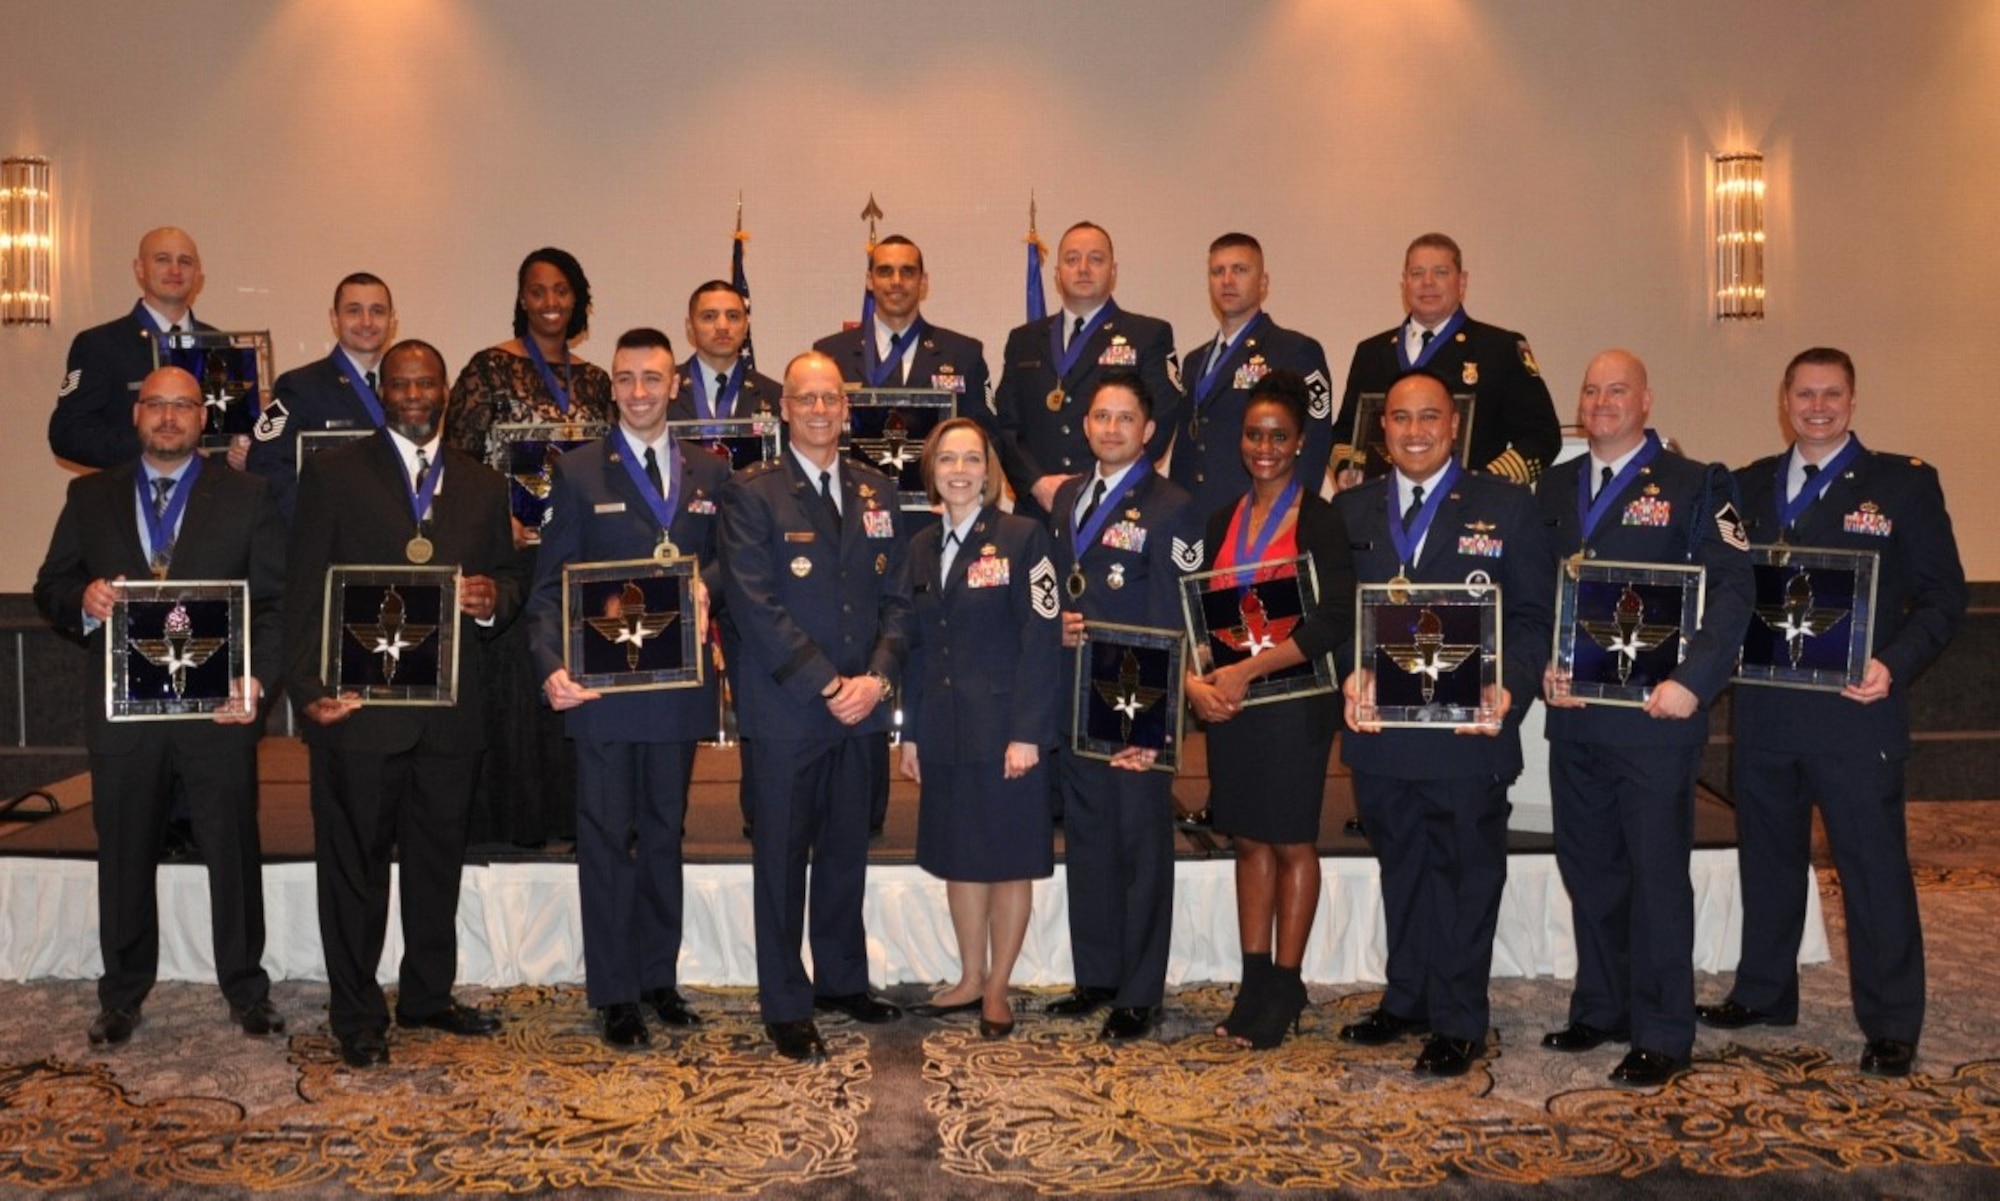 Winners of the 2018 Air Education and Training Command Outstanding Airmen of the Year awards stand with Maj. Gen. Mark Weatherington (third from left) and command chief of AETC, Chief Master Sgt. Juliet Gudgel (fourth from left) during a ceremony in Orlando, Fla., Feb. 26, 2019.  A total of 21 Airmen were recognized at the event and move on to the the Air Force-level competition. (U.S. Air Force photo by 1st Lt. Kayshel Trudell)